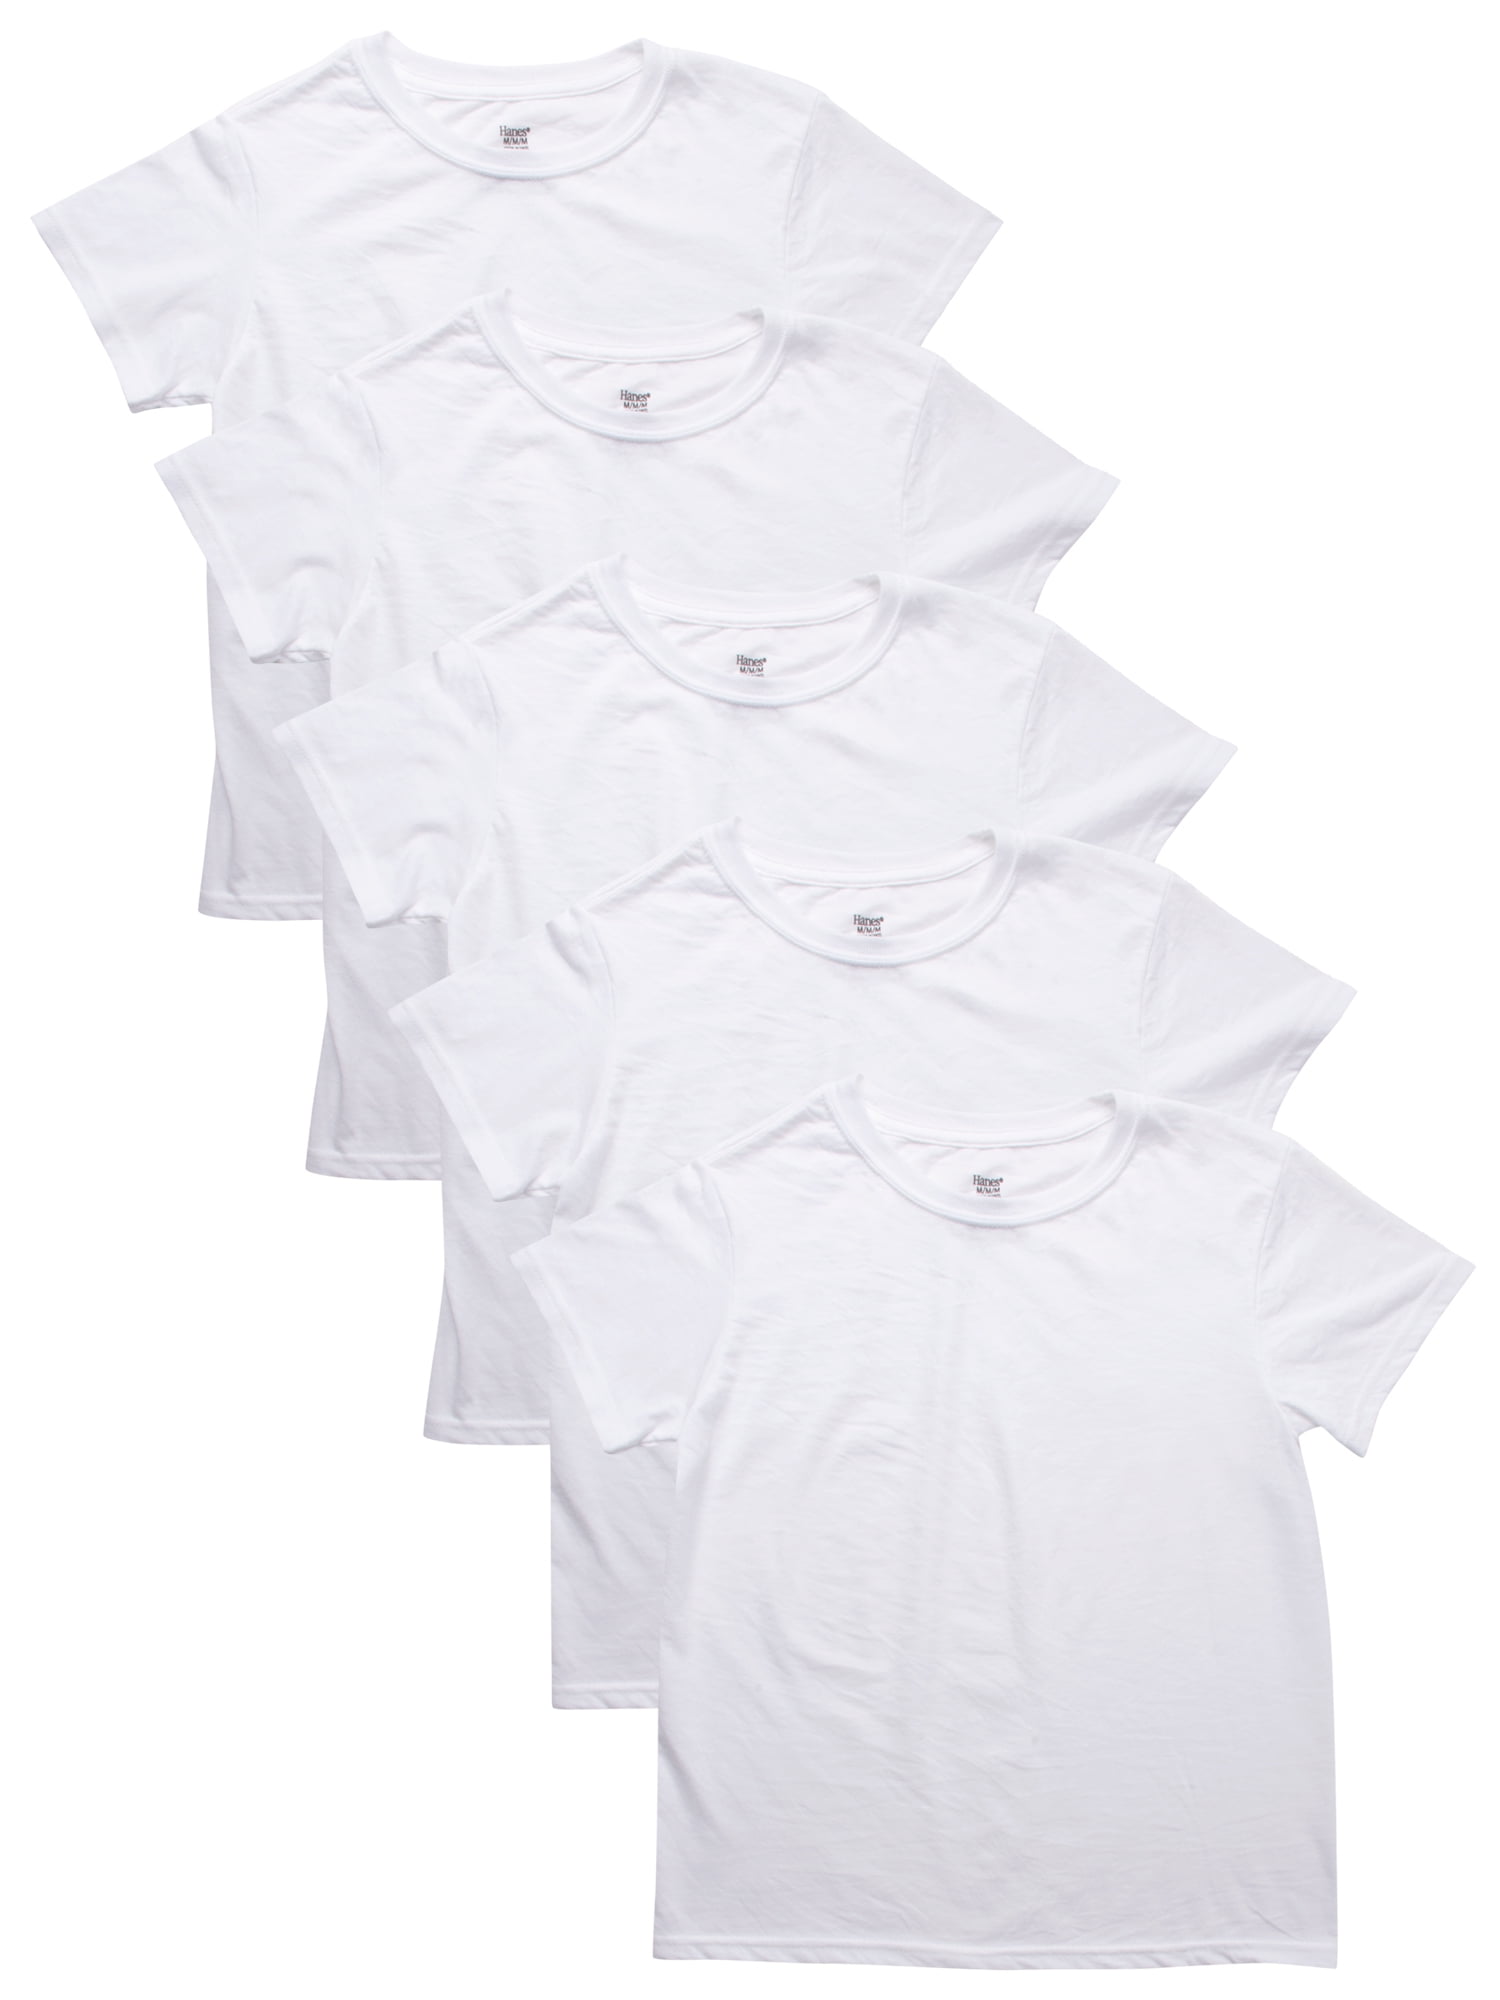 Details about   Hanes  Boys 5 Pack White Undershirts Youth T-Shirts L 14-16 